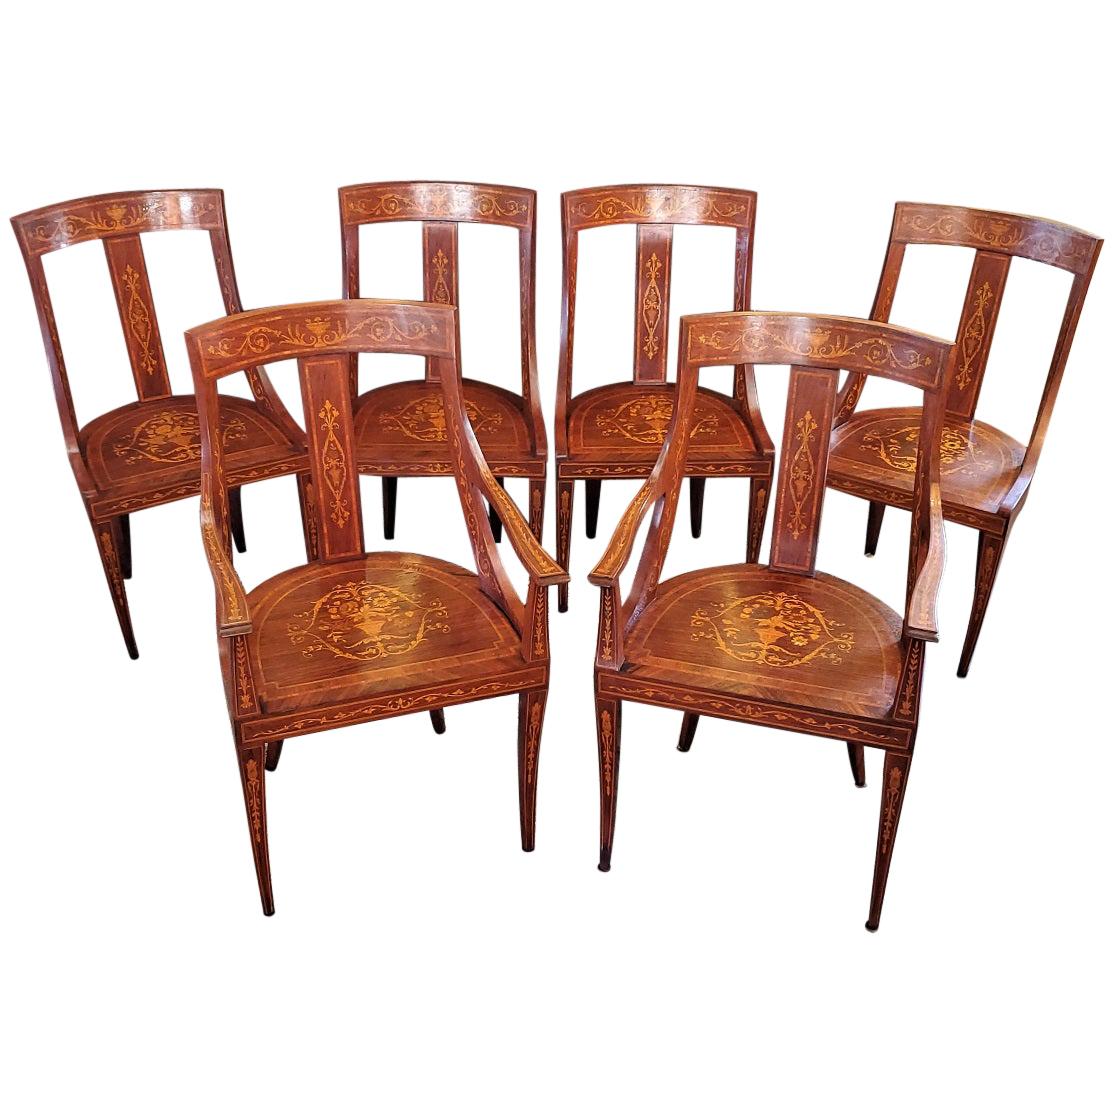 Set of 6 French Empire Marquetry Chairs For Sale